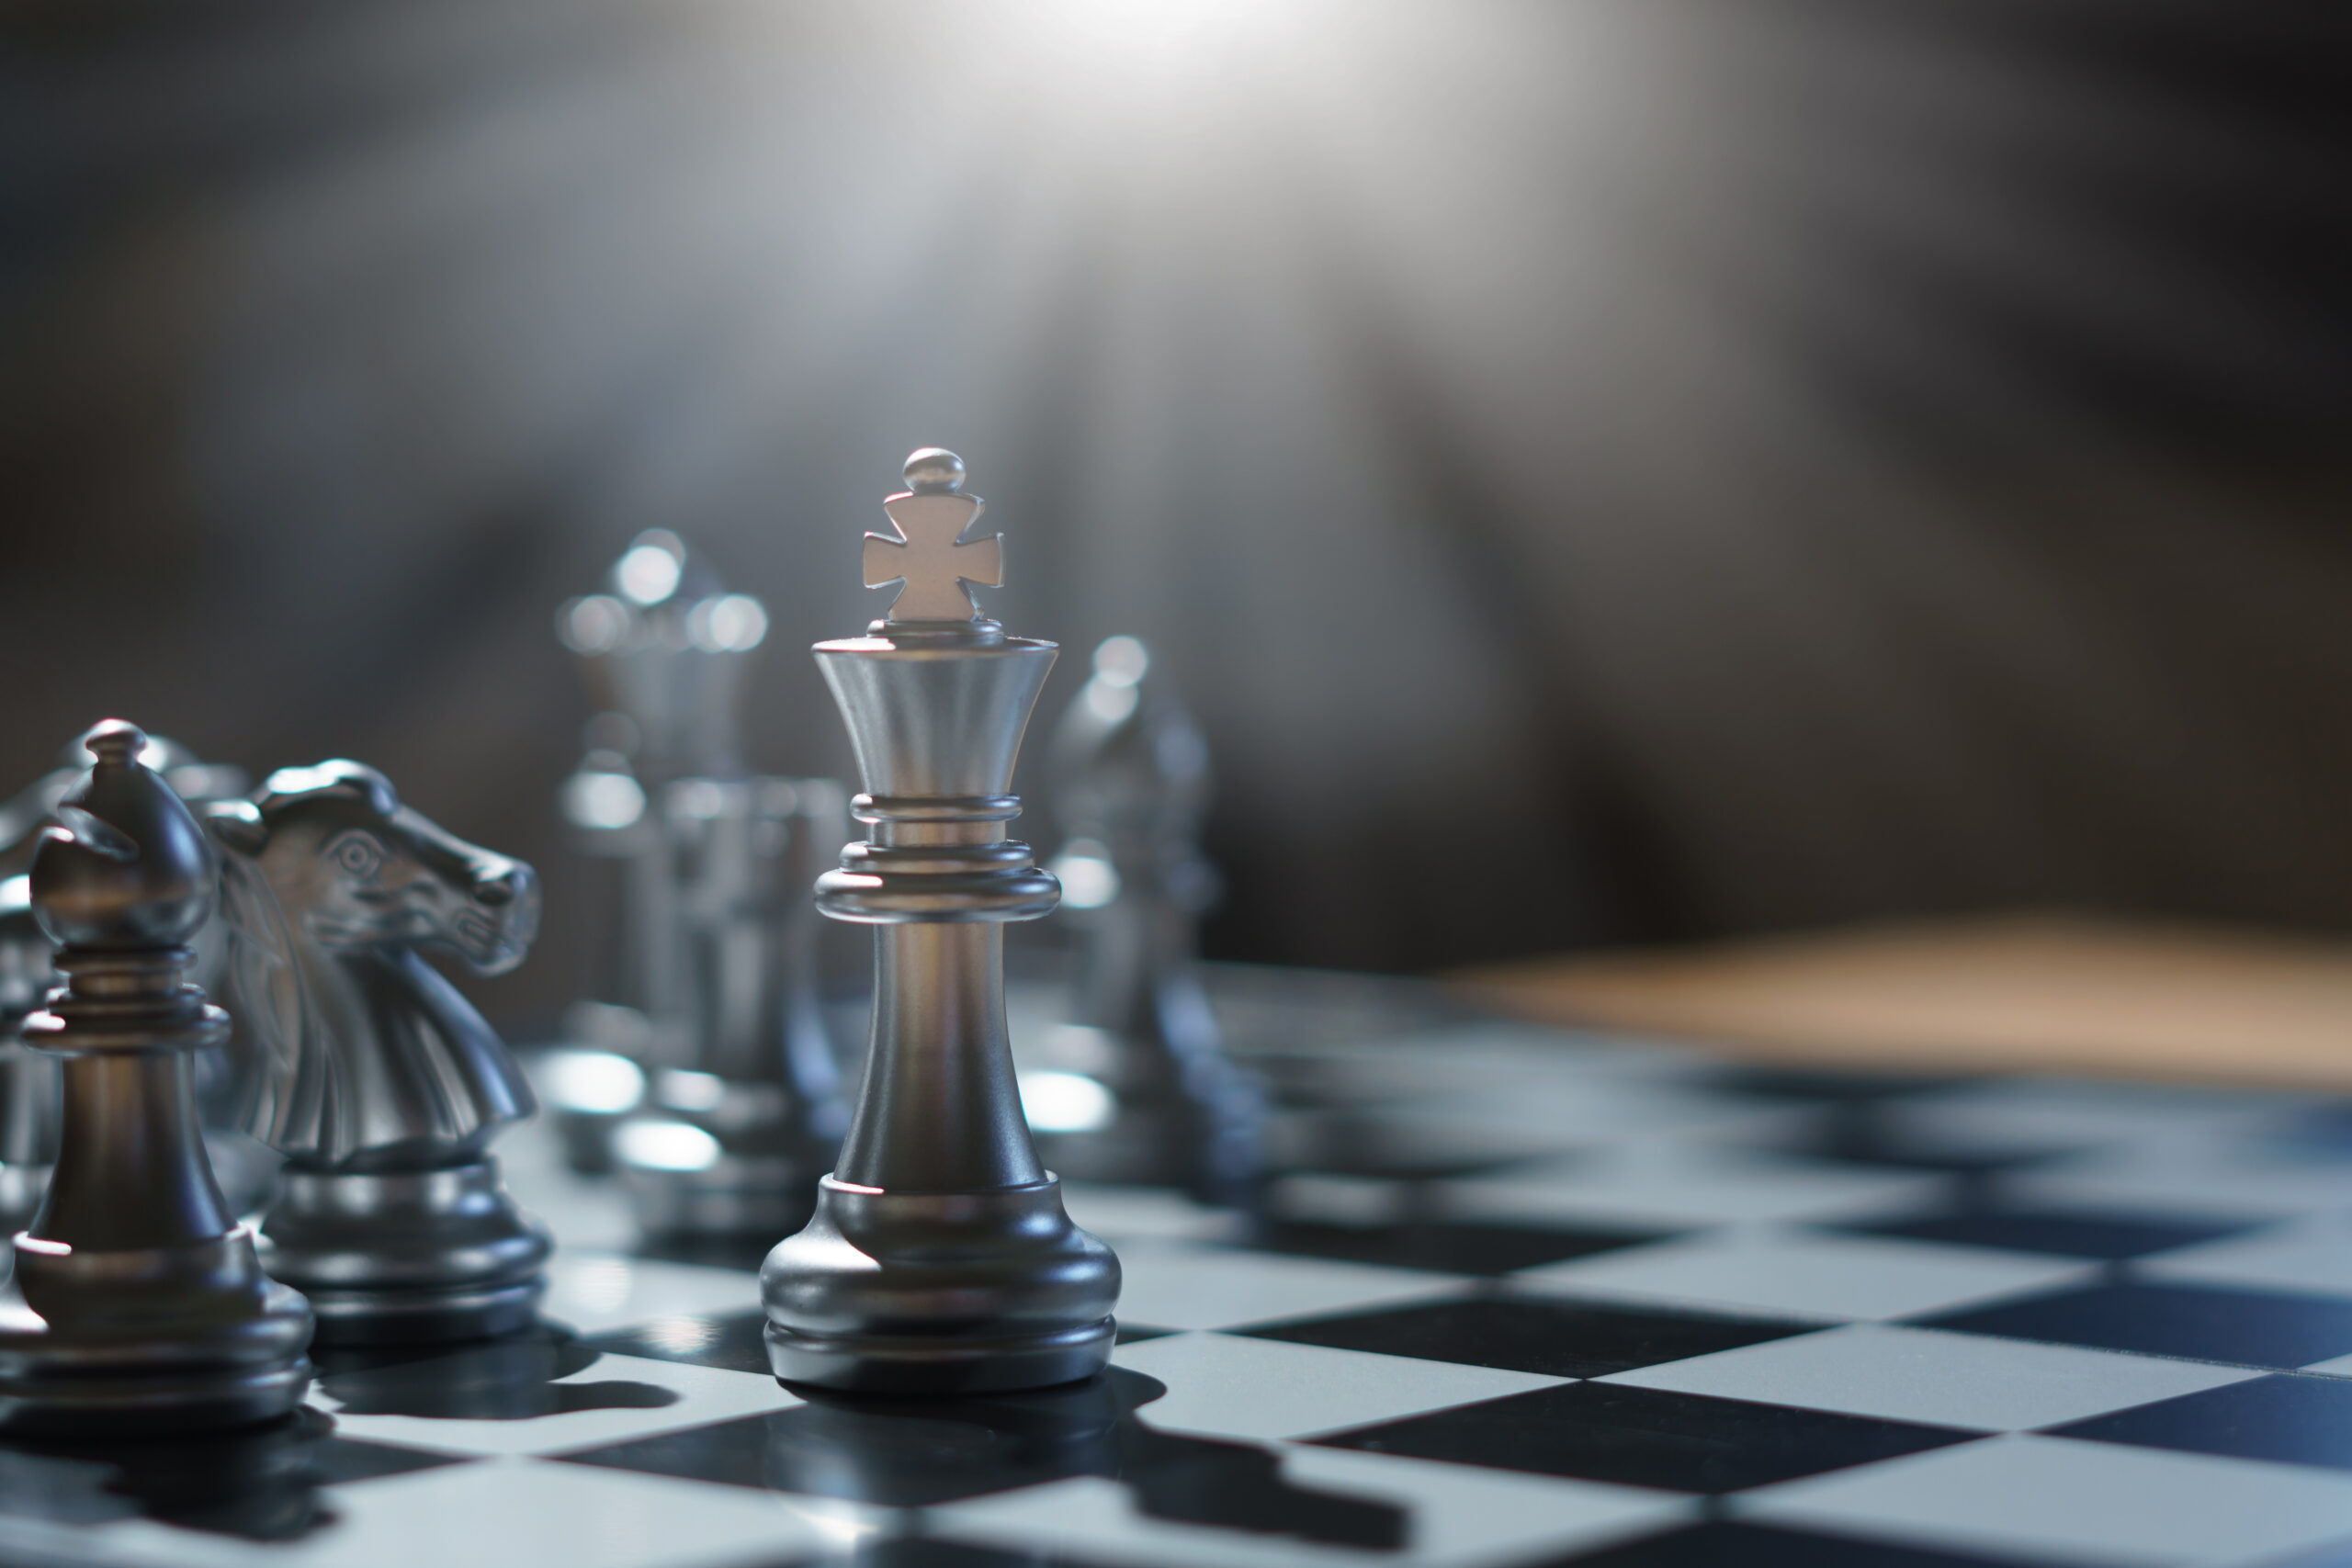 The King in battle chess game stand on chessboard  Business leader concept for market target strategy. Intelligence challenge and business competition success play.